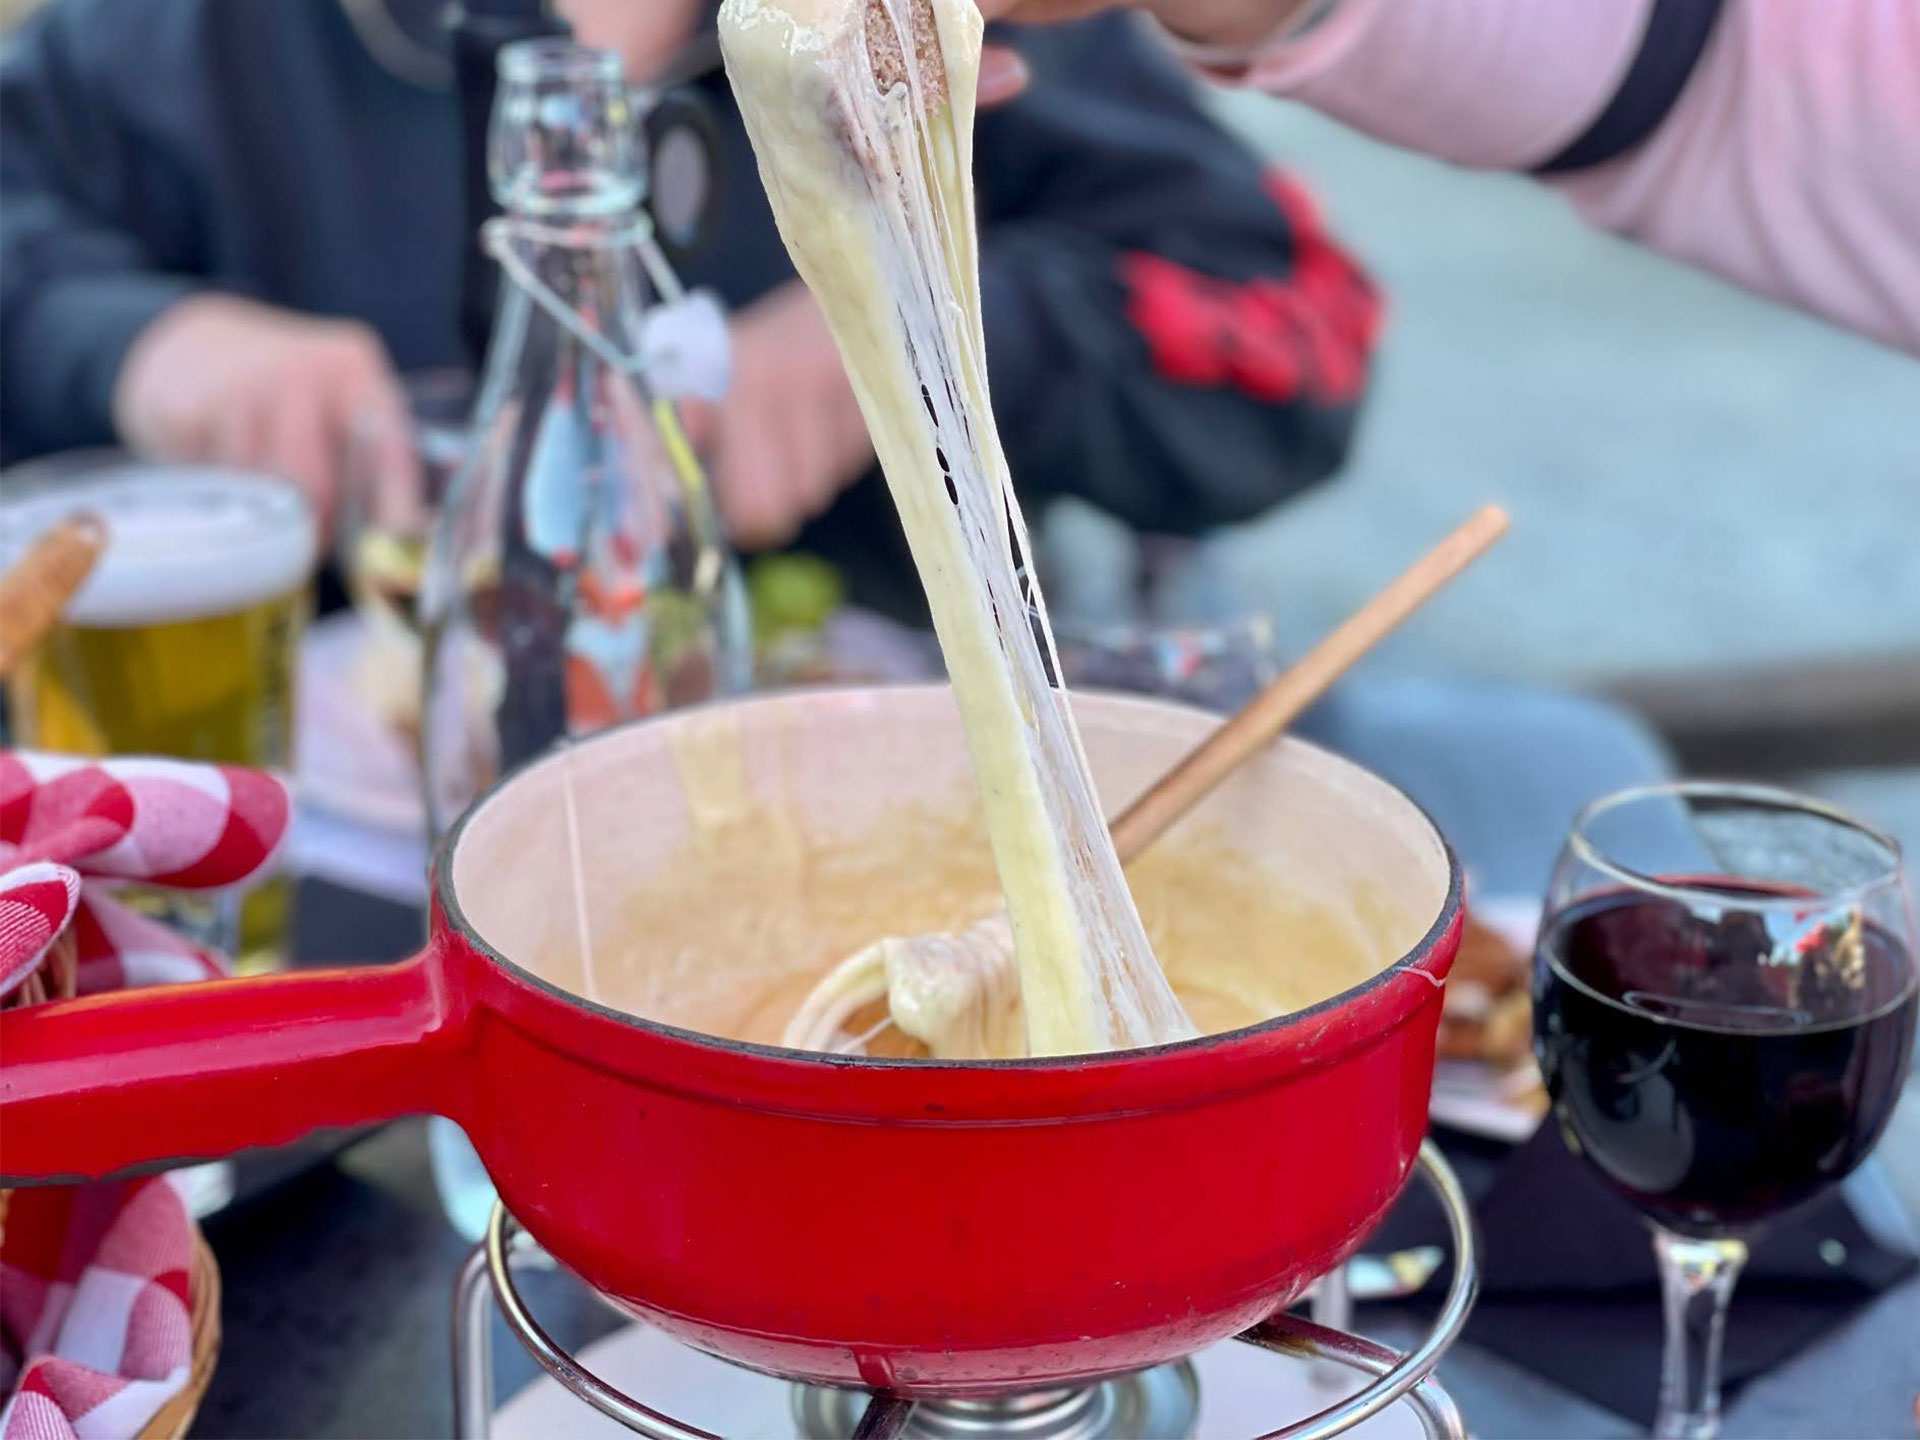 The best restaurants things to do in Collingwood | Famous cheese fondue at The Alphorn